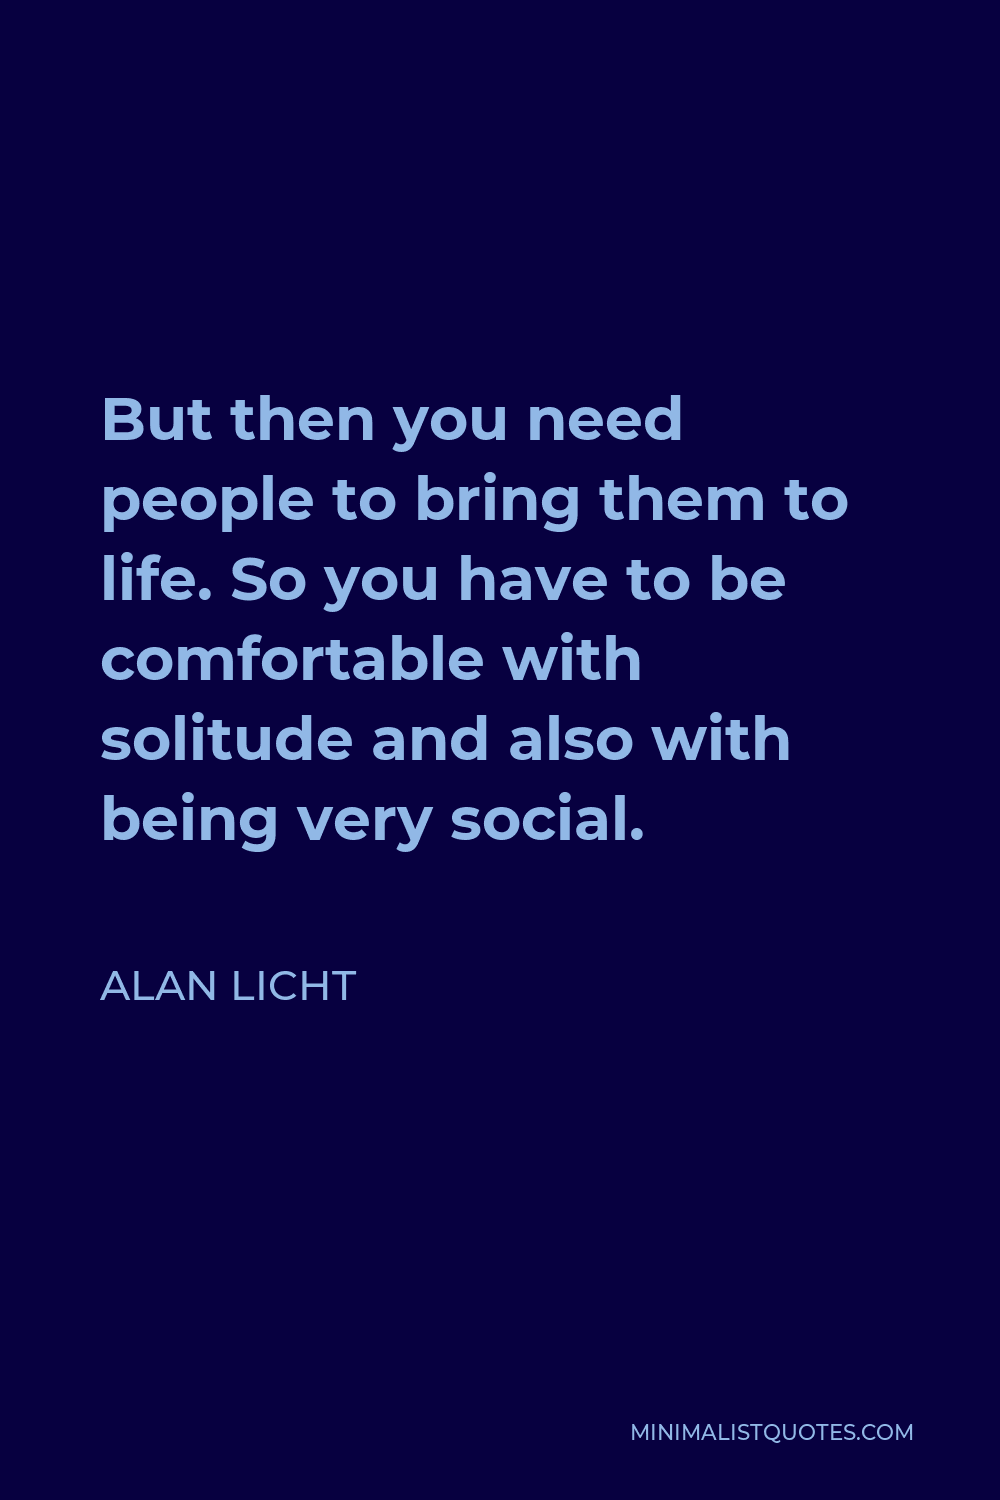 Alan Licht Quote - But then you need people to bring them to life. So you have to be comfortable with solitude and also with being very social.